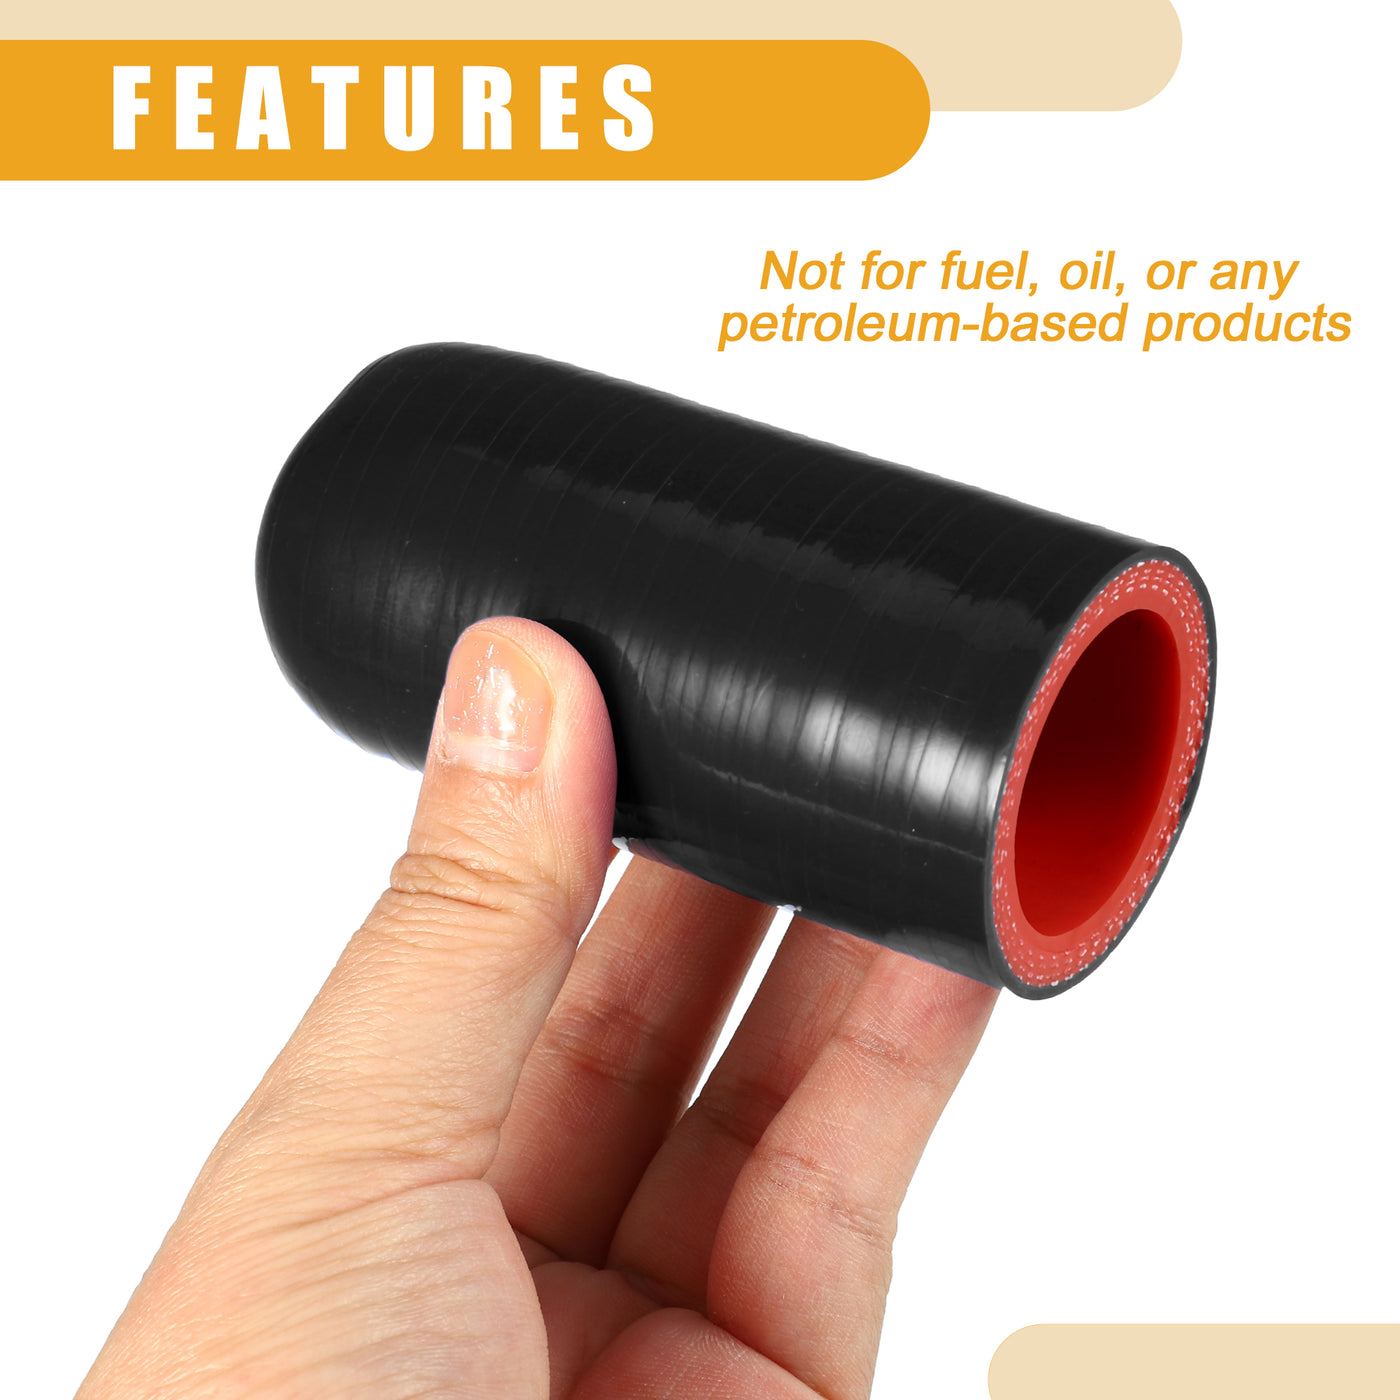 Partuto 1 Set 30mm 1.18" ID Universal Silicone Coolant Cap Intake Vacuum Hose End Plug - Car for Coolant Heater Bypass Vacuum Water Port - Silicone Black Red